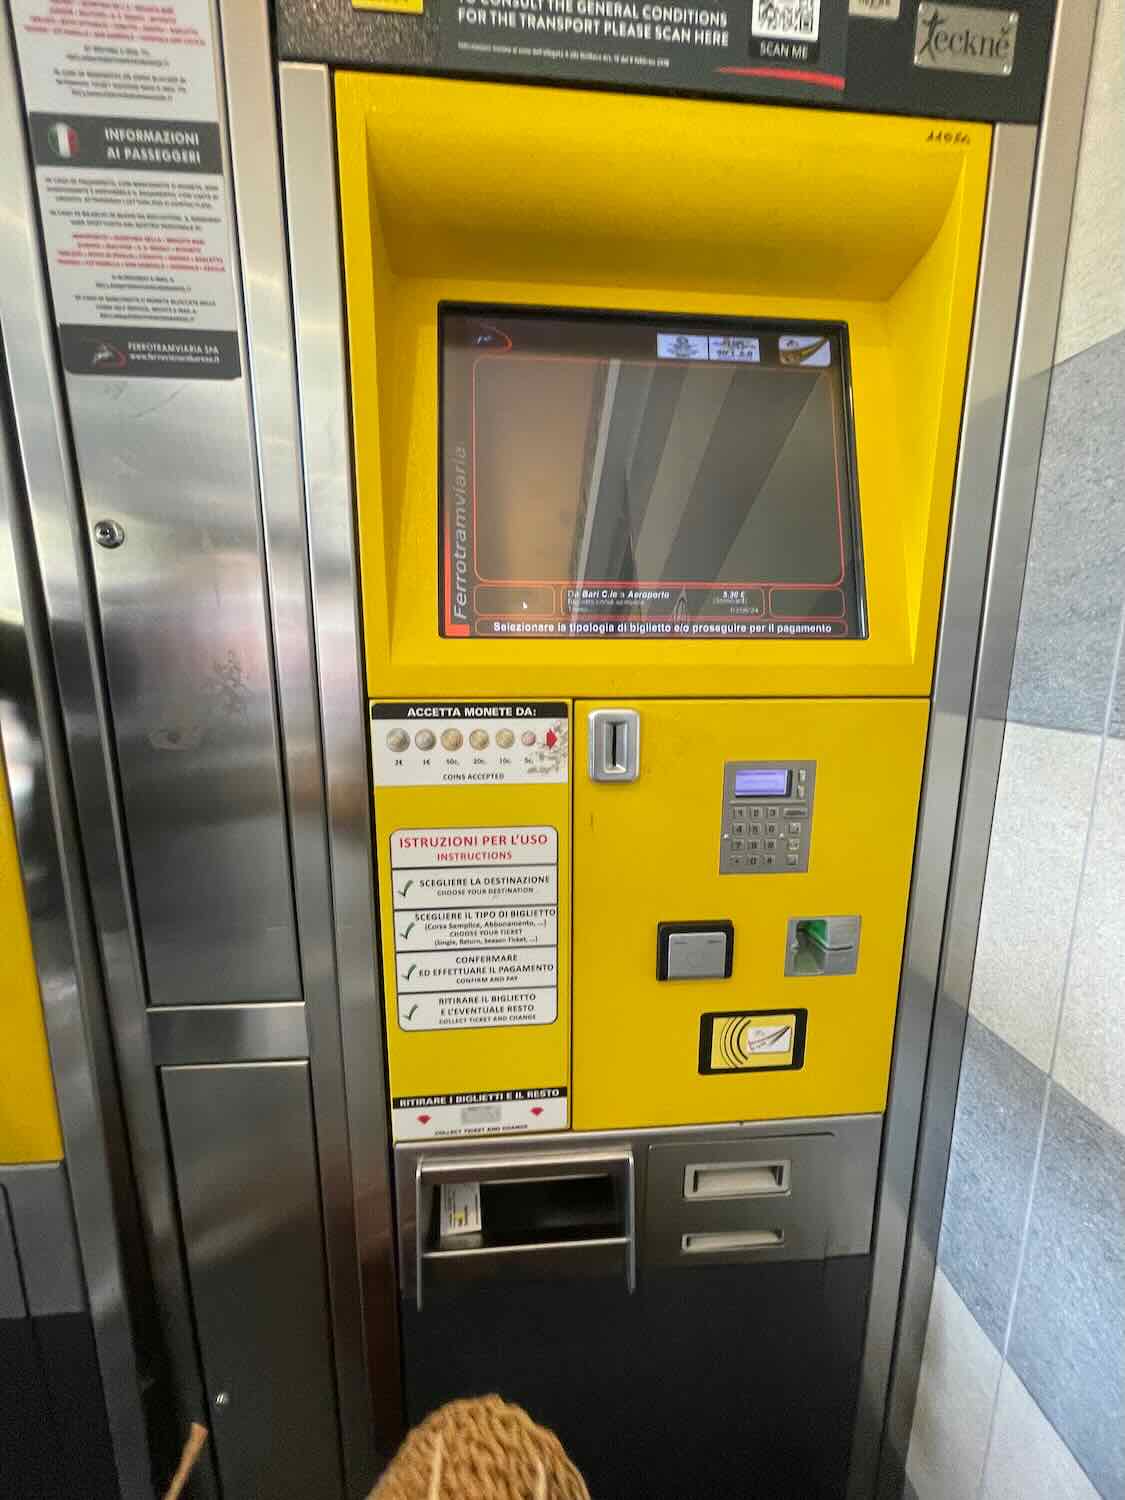 A yellow ticket machine at Bari airport, with instructions in Italian and options for selecting destinations and ticket types. The screen is currently off, and the machine accepts both coins and cards for payment.